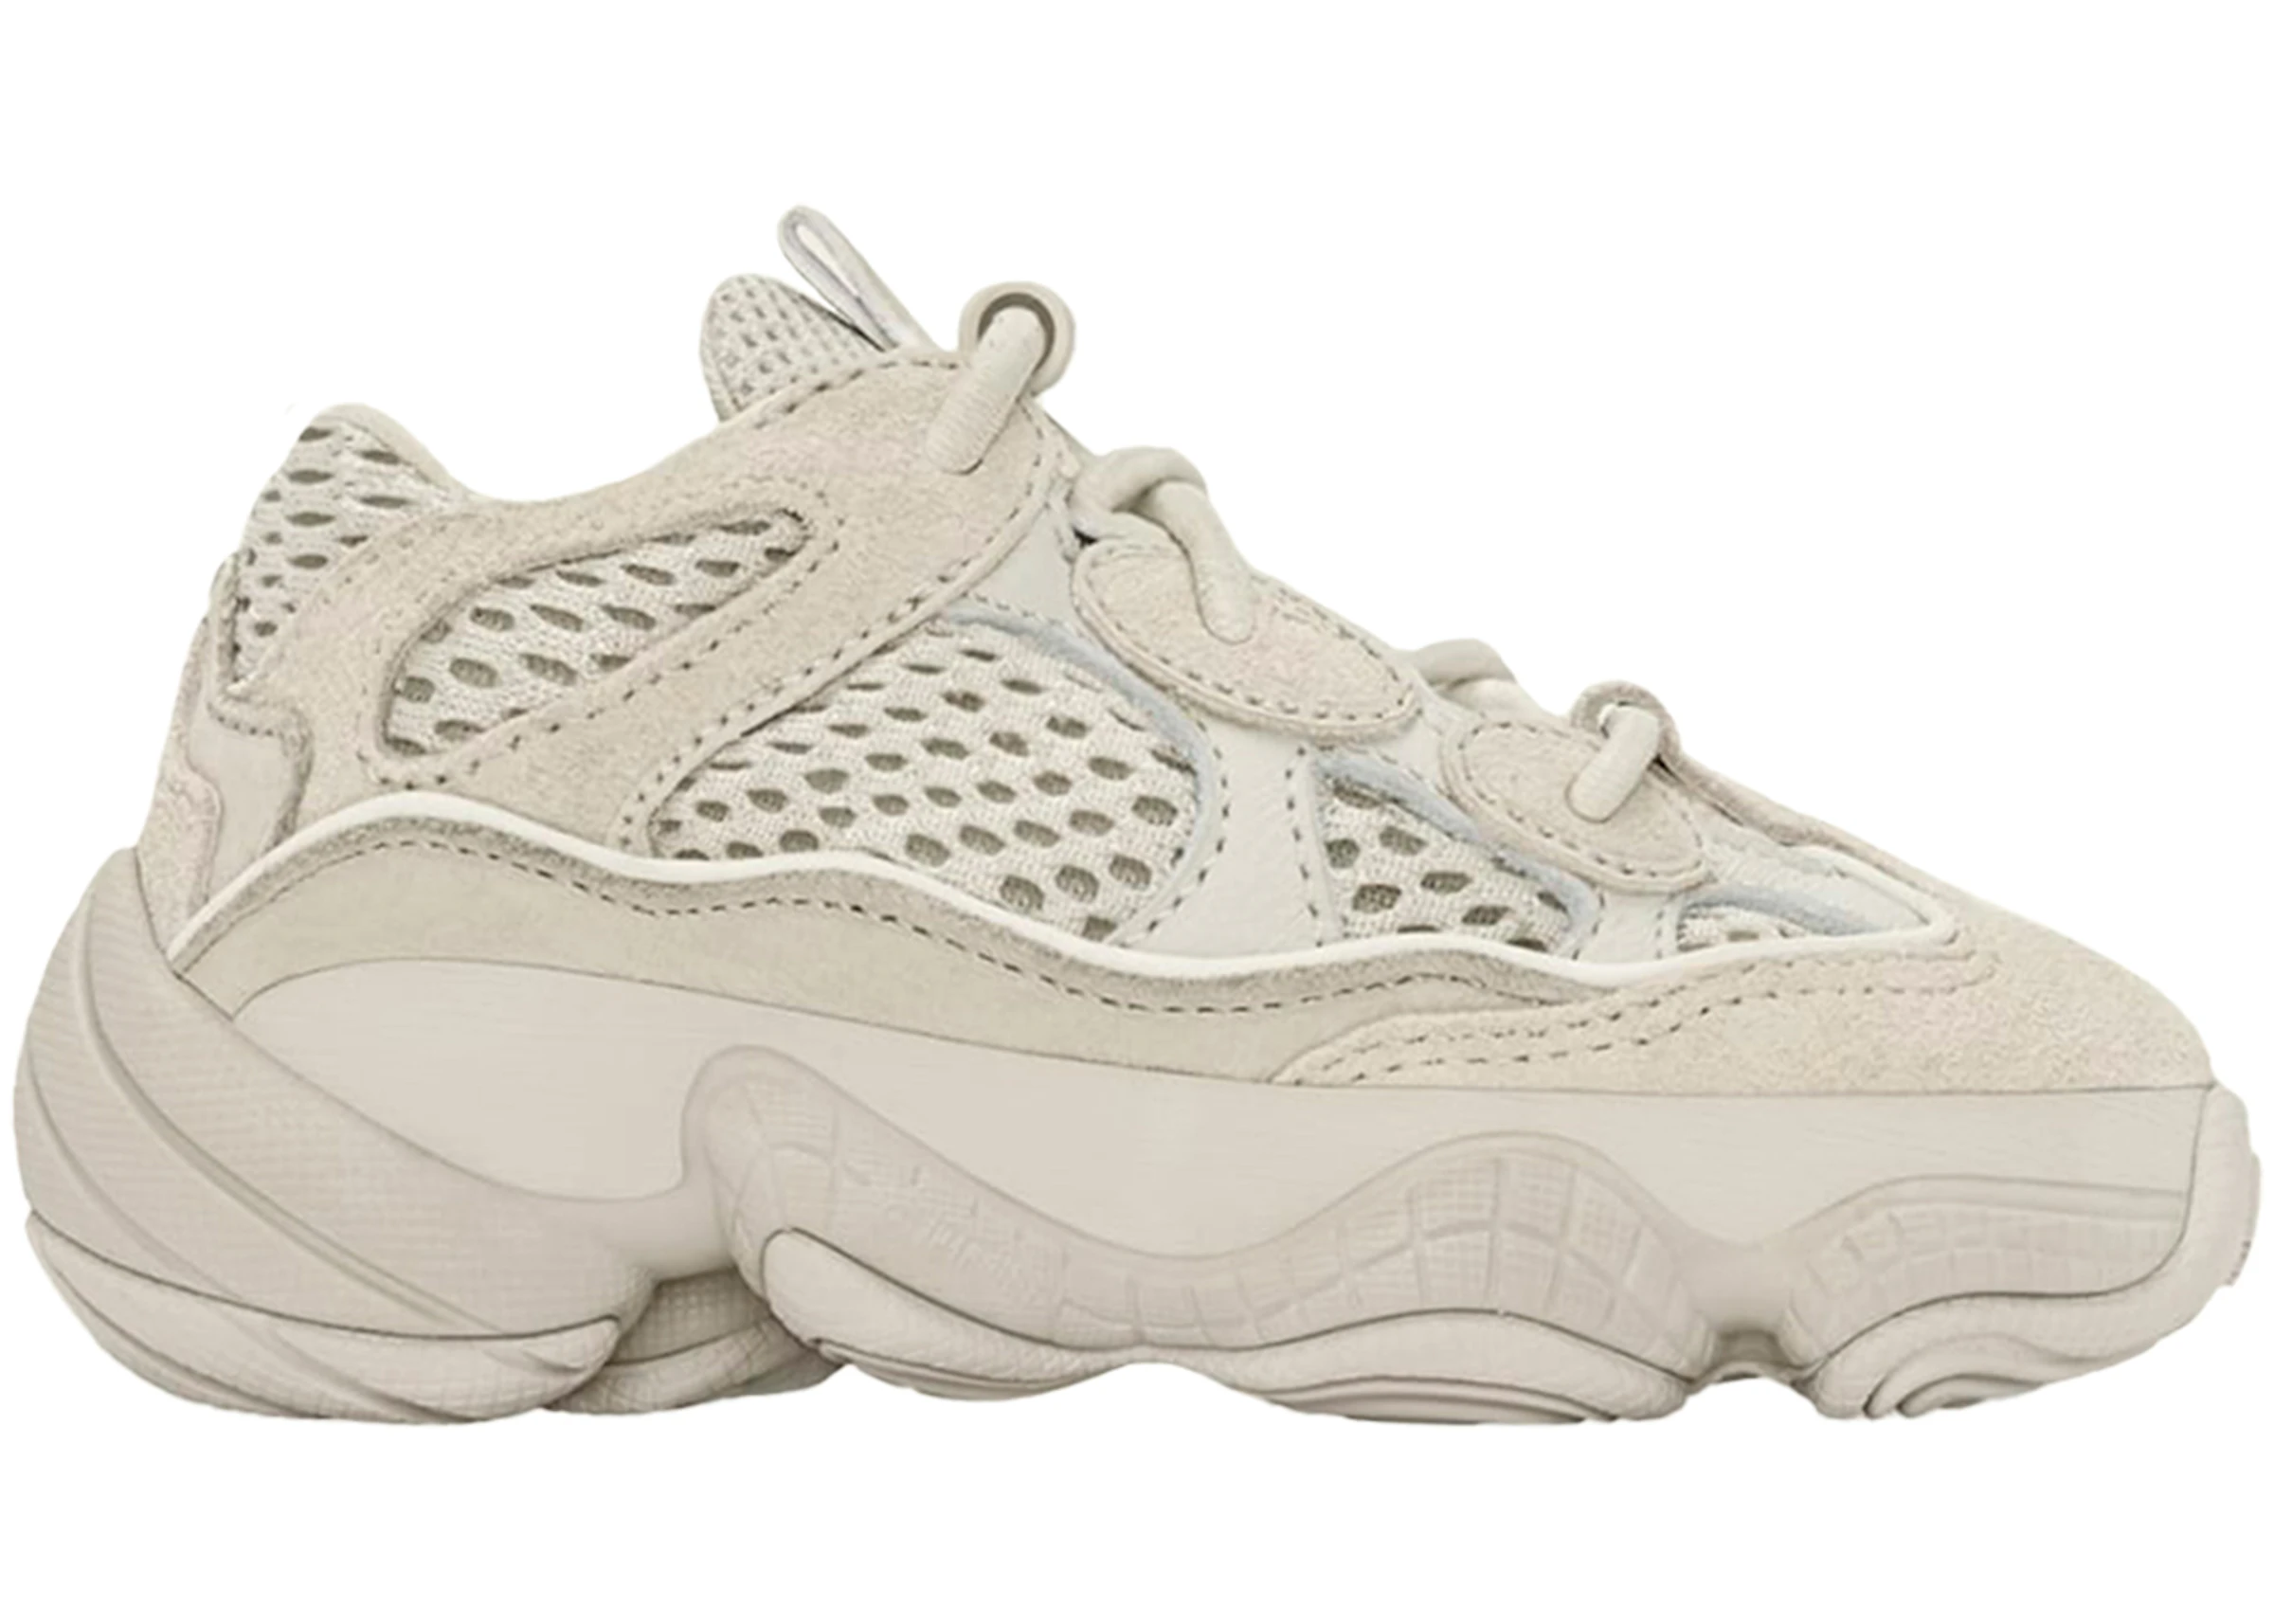 Related Ritual Lodging adidas Yeezy 500 Blush (2022) (Infants) - HQ6026 - US